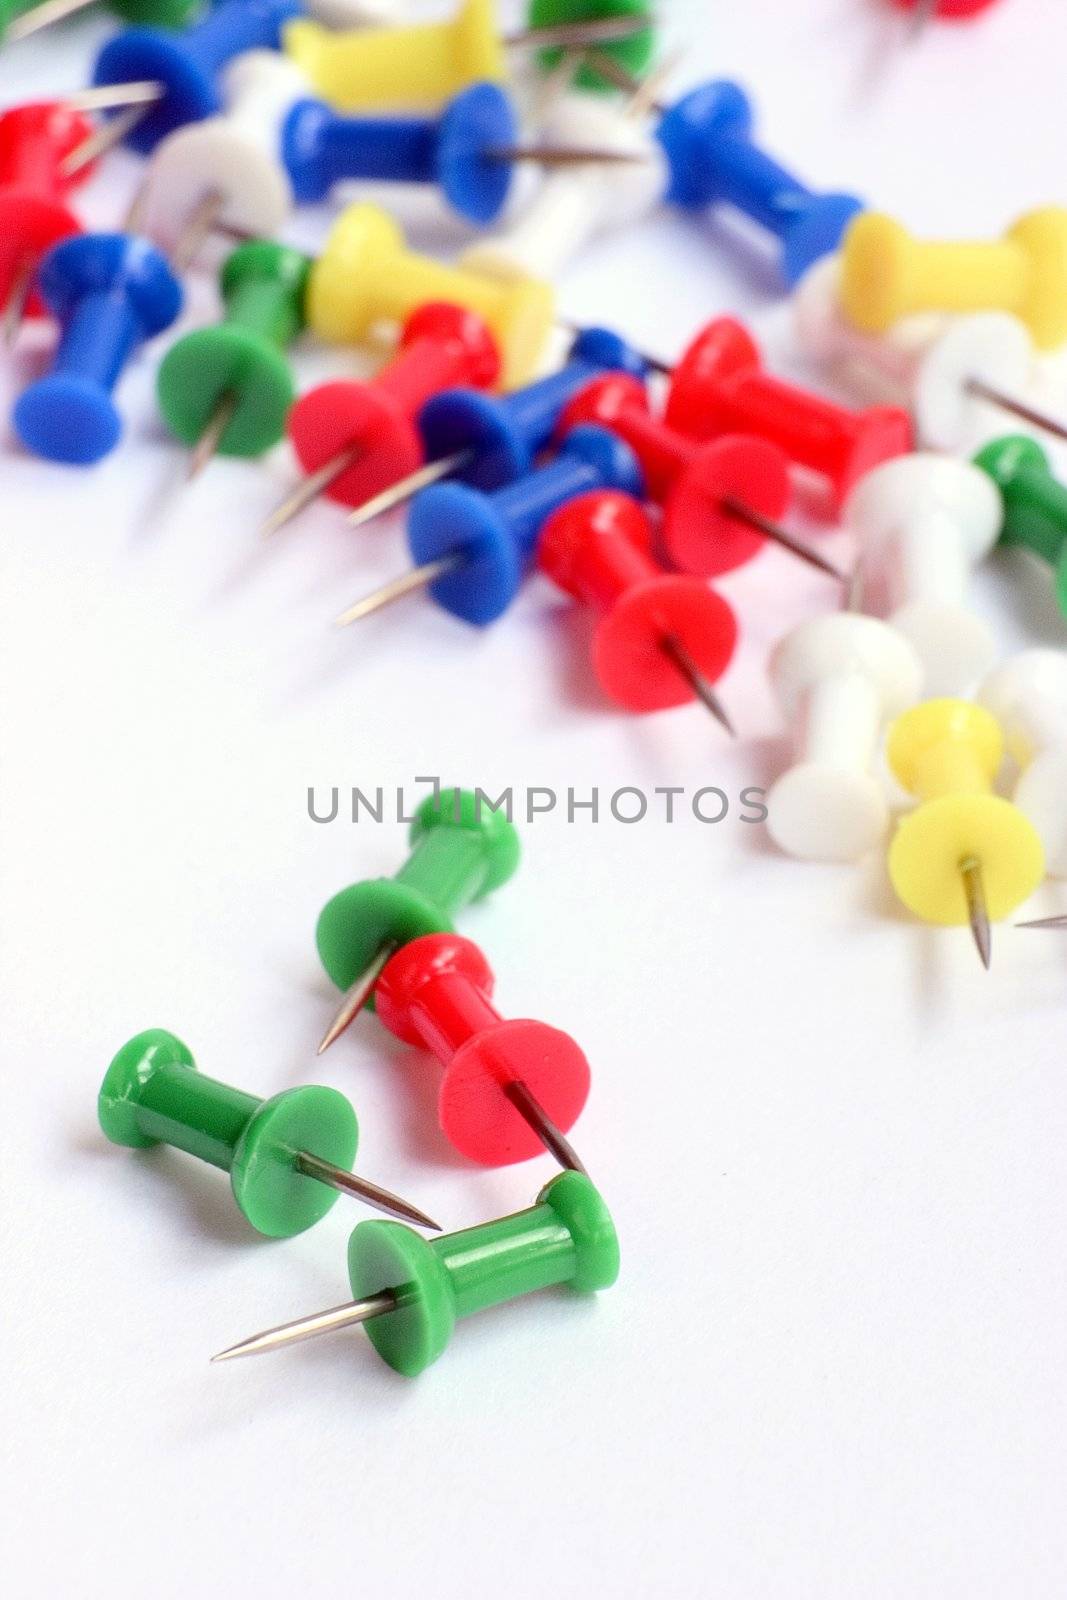 Multicolored push pins on bright background